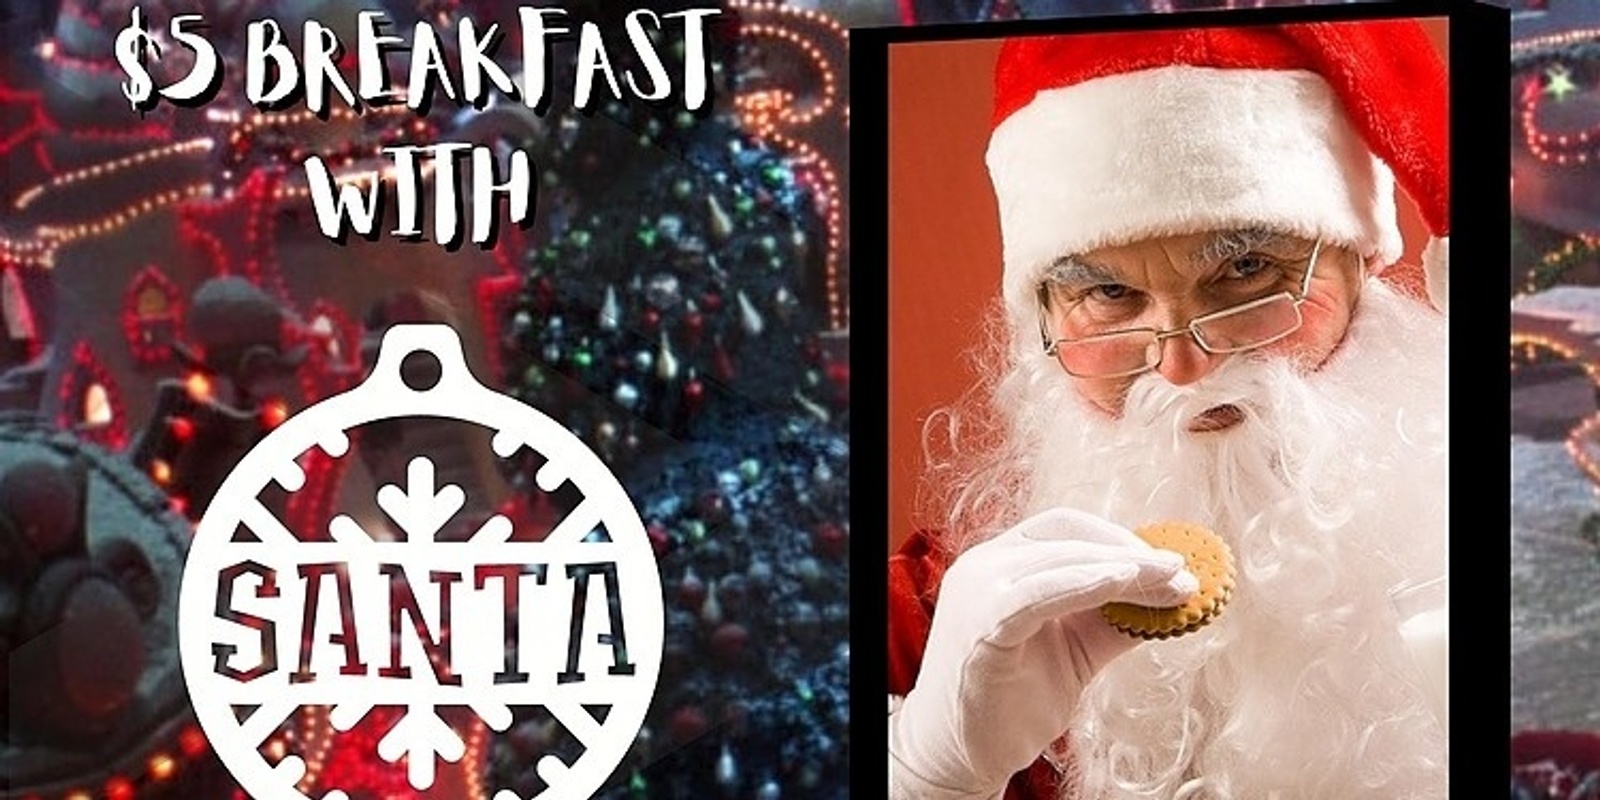 Banner image for $5 Breakfast with Santa Claus at Krackpots Comedy Club, Massillon